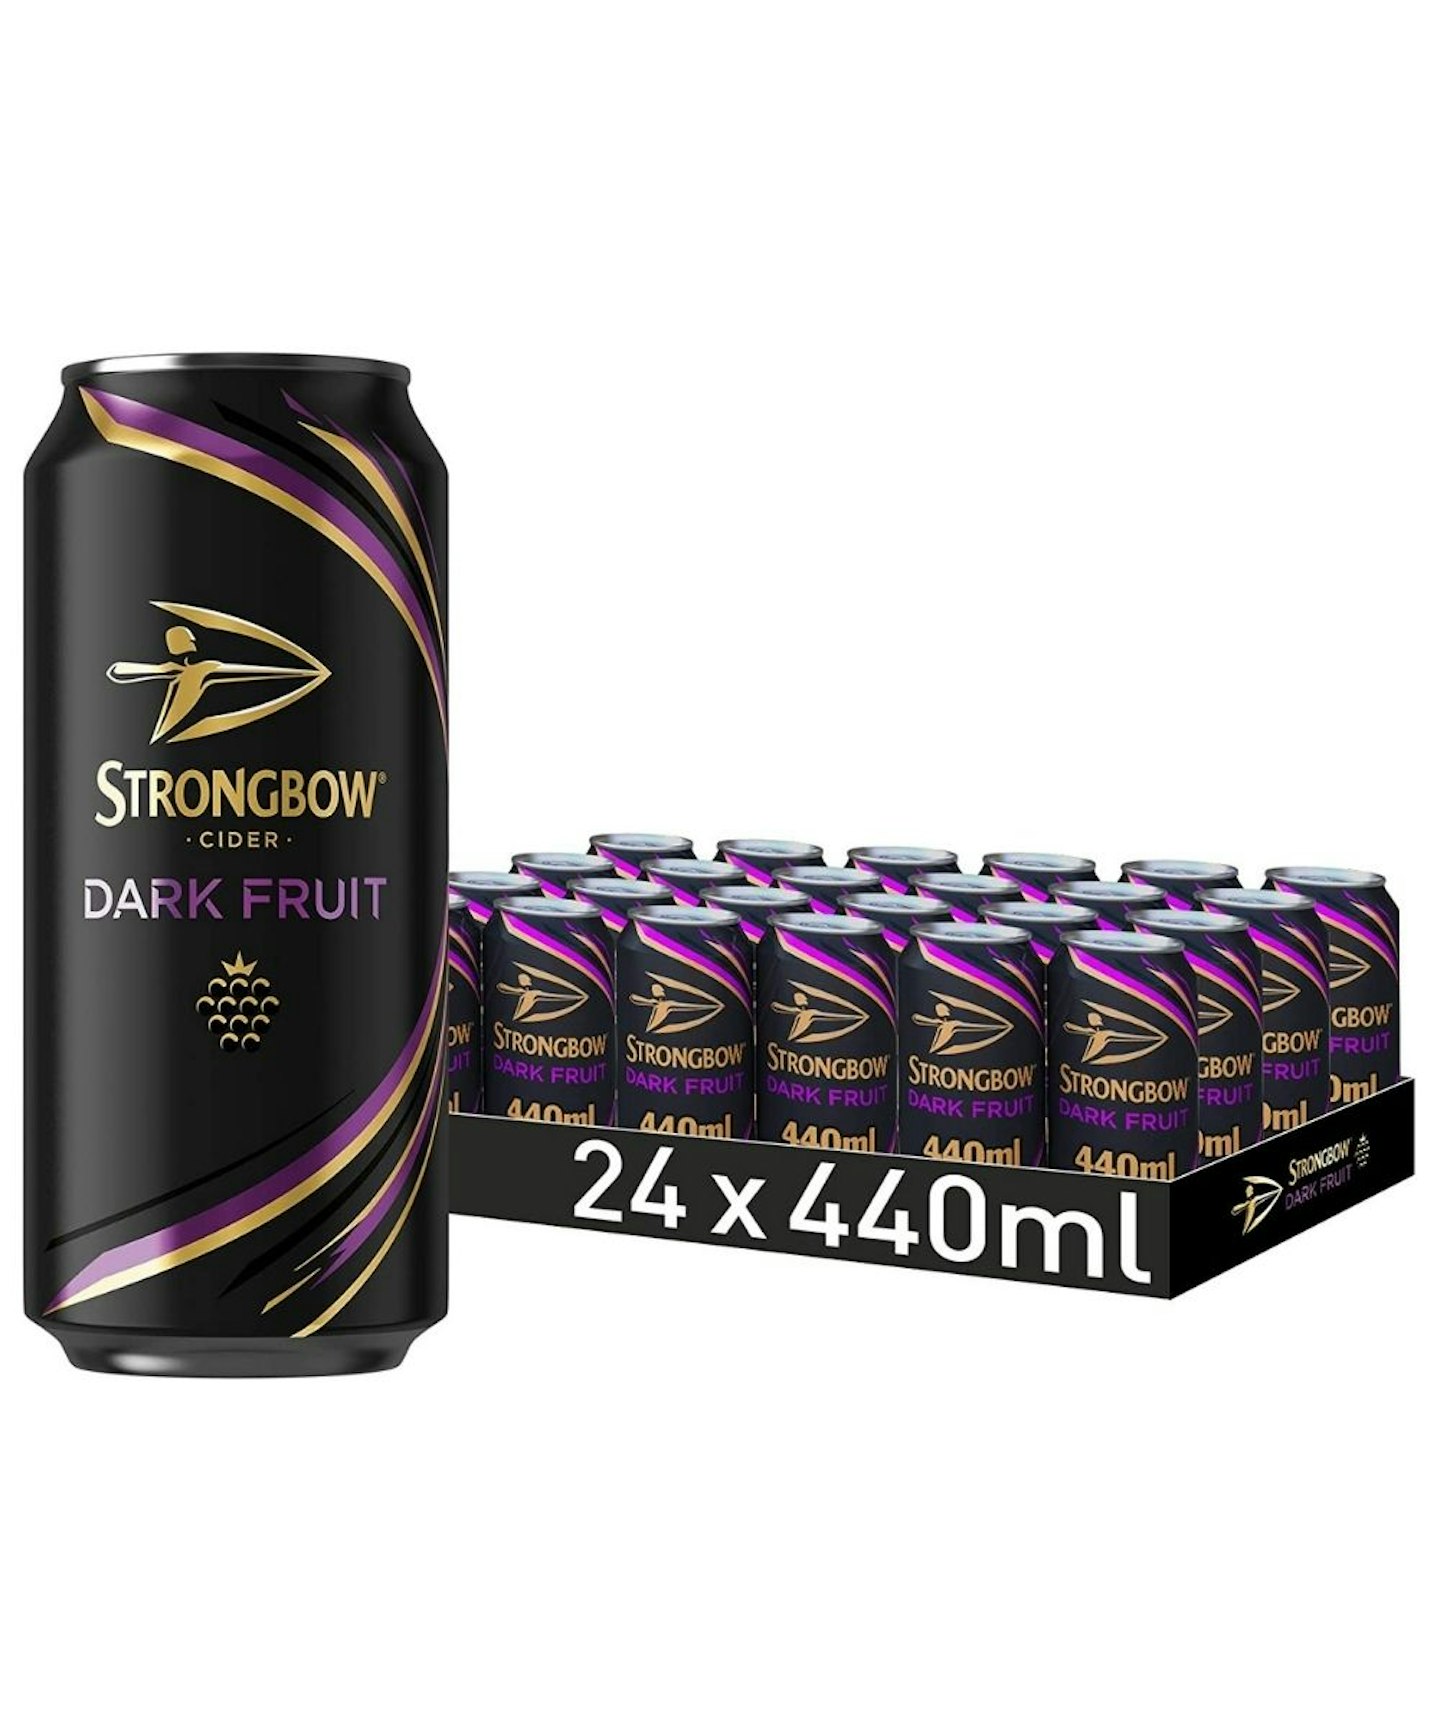 Strongbow Dark Fruit Cider Cans, 24 x 440 ml